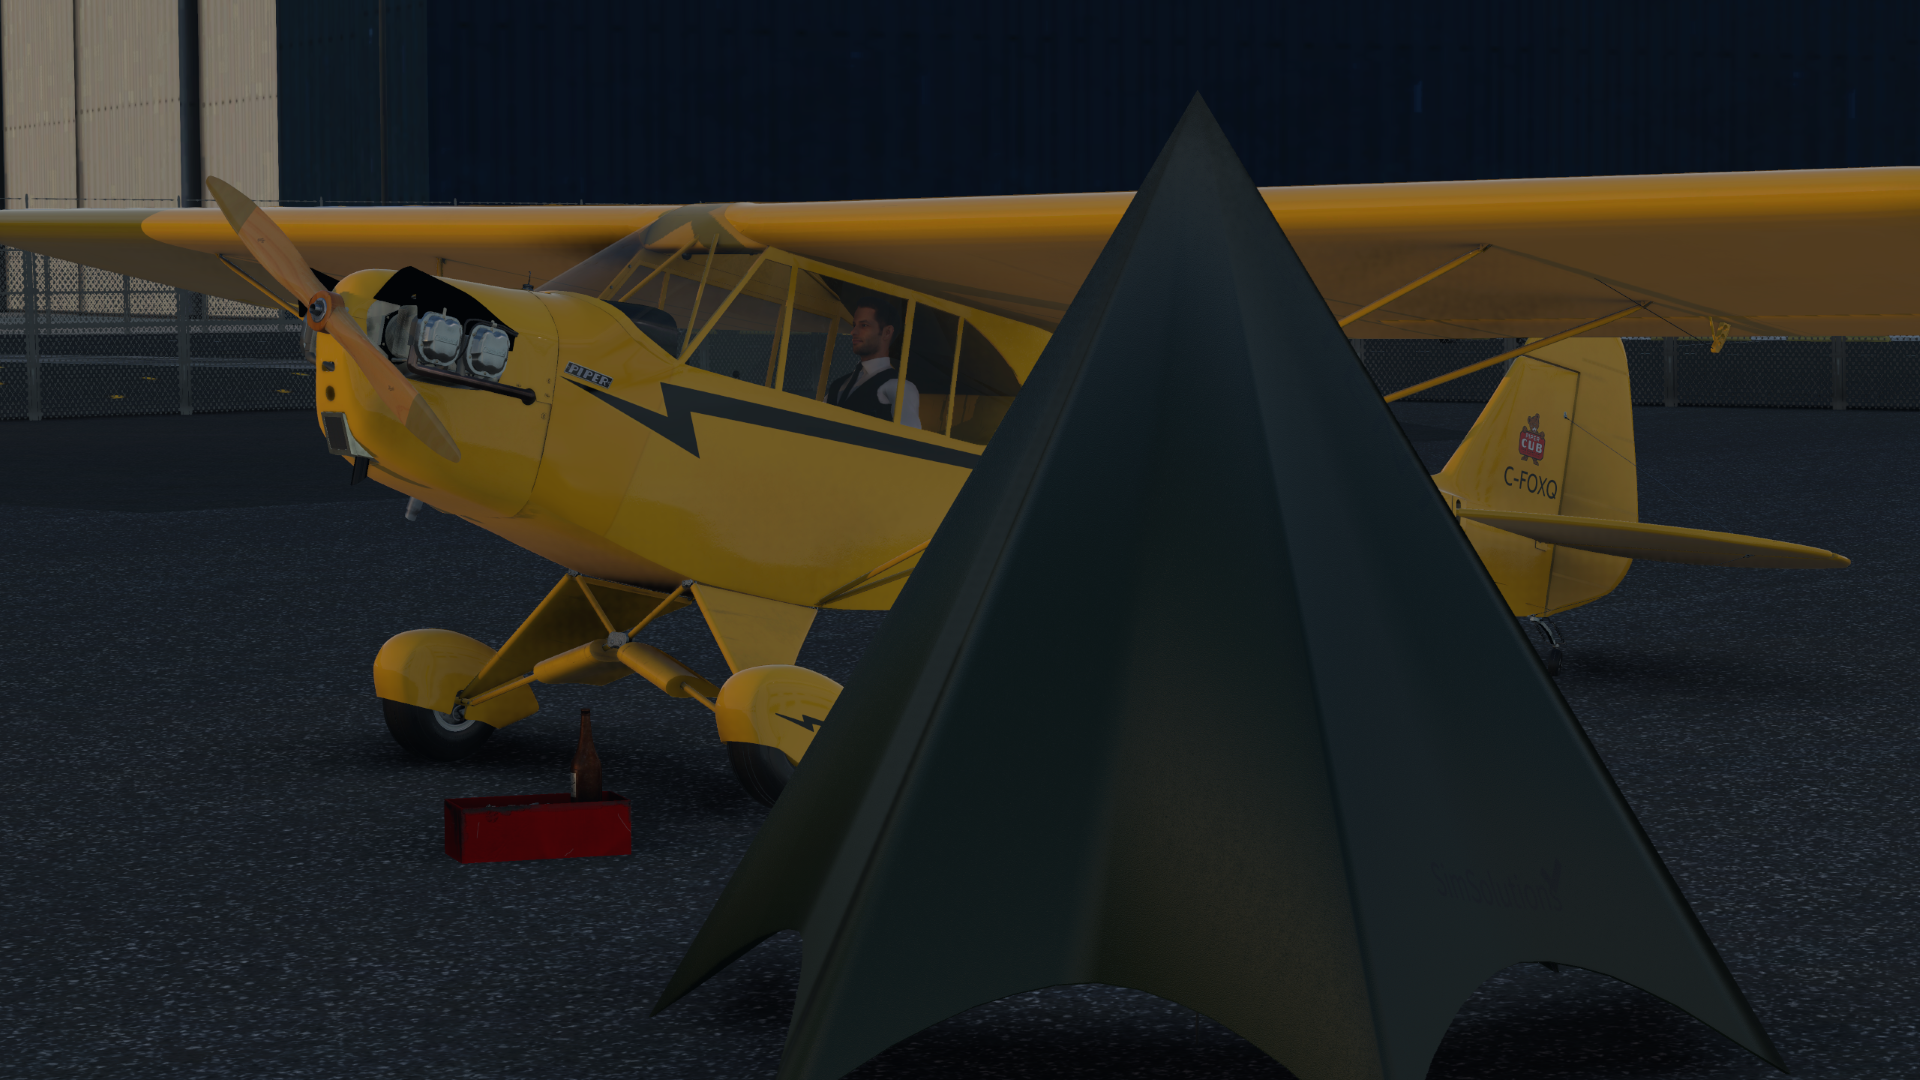 SimSolutions Releases J3 Cub for X-Plane - SimSolutions, X-Plane